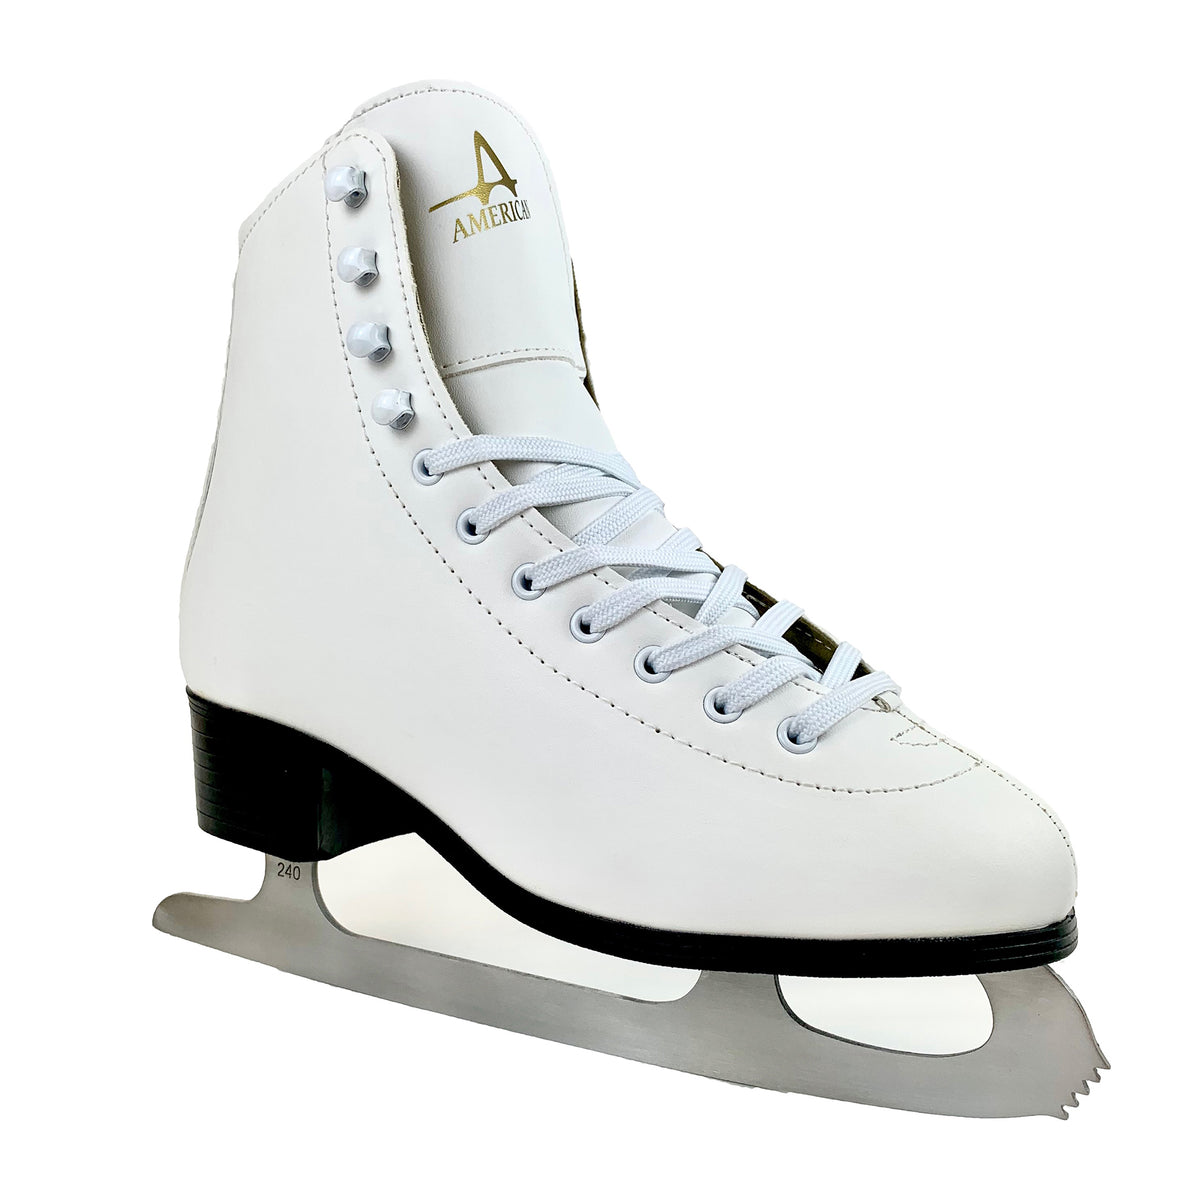 Womens Tricot Lined Figure Skate